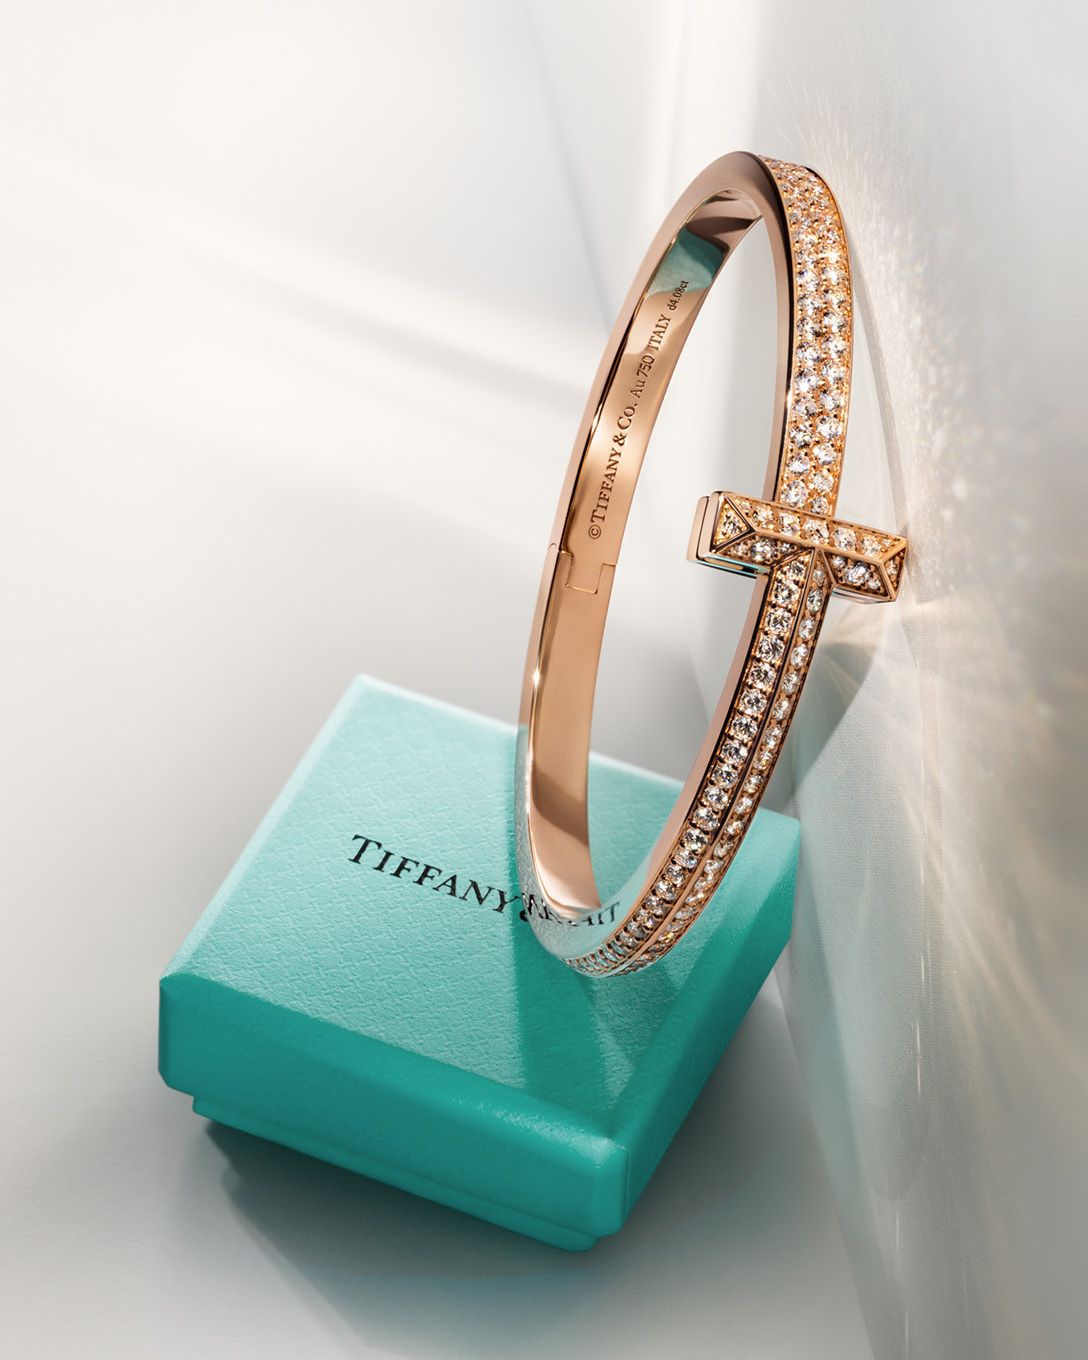 Tiffany & Co. on X: In 1847, Tiffany began selling watches